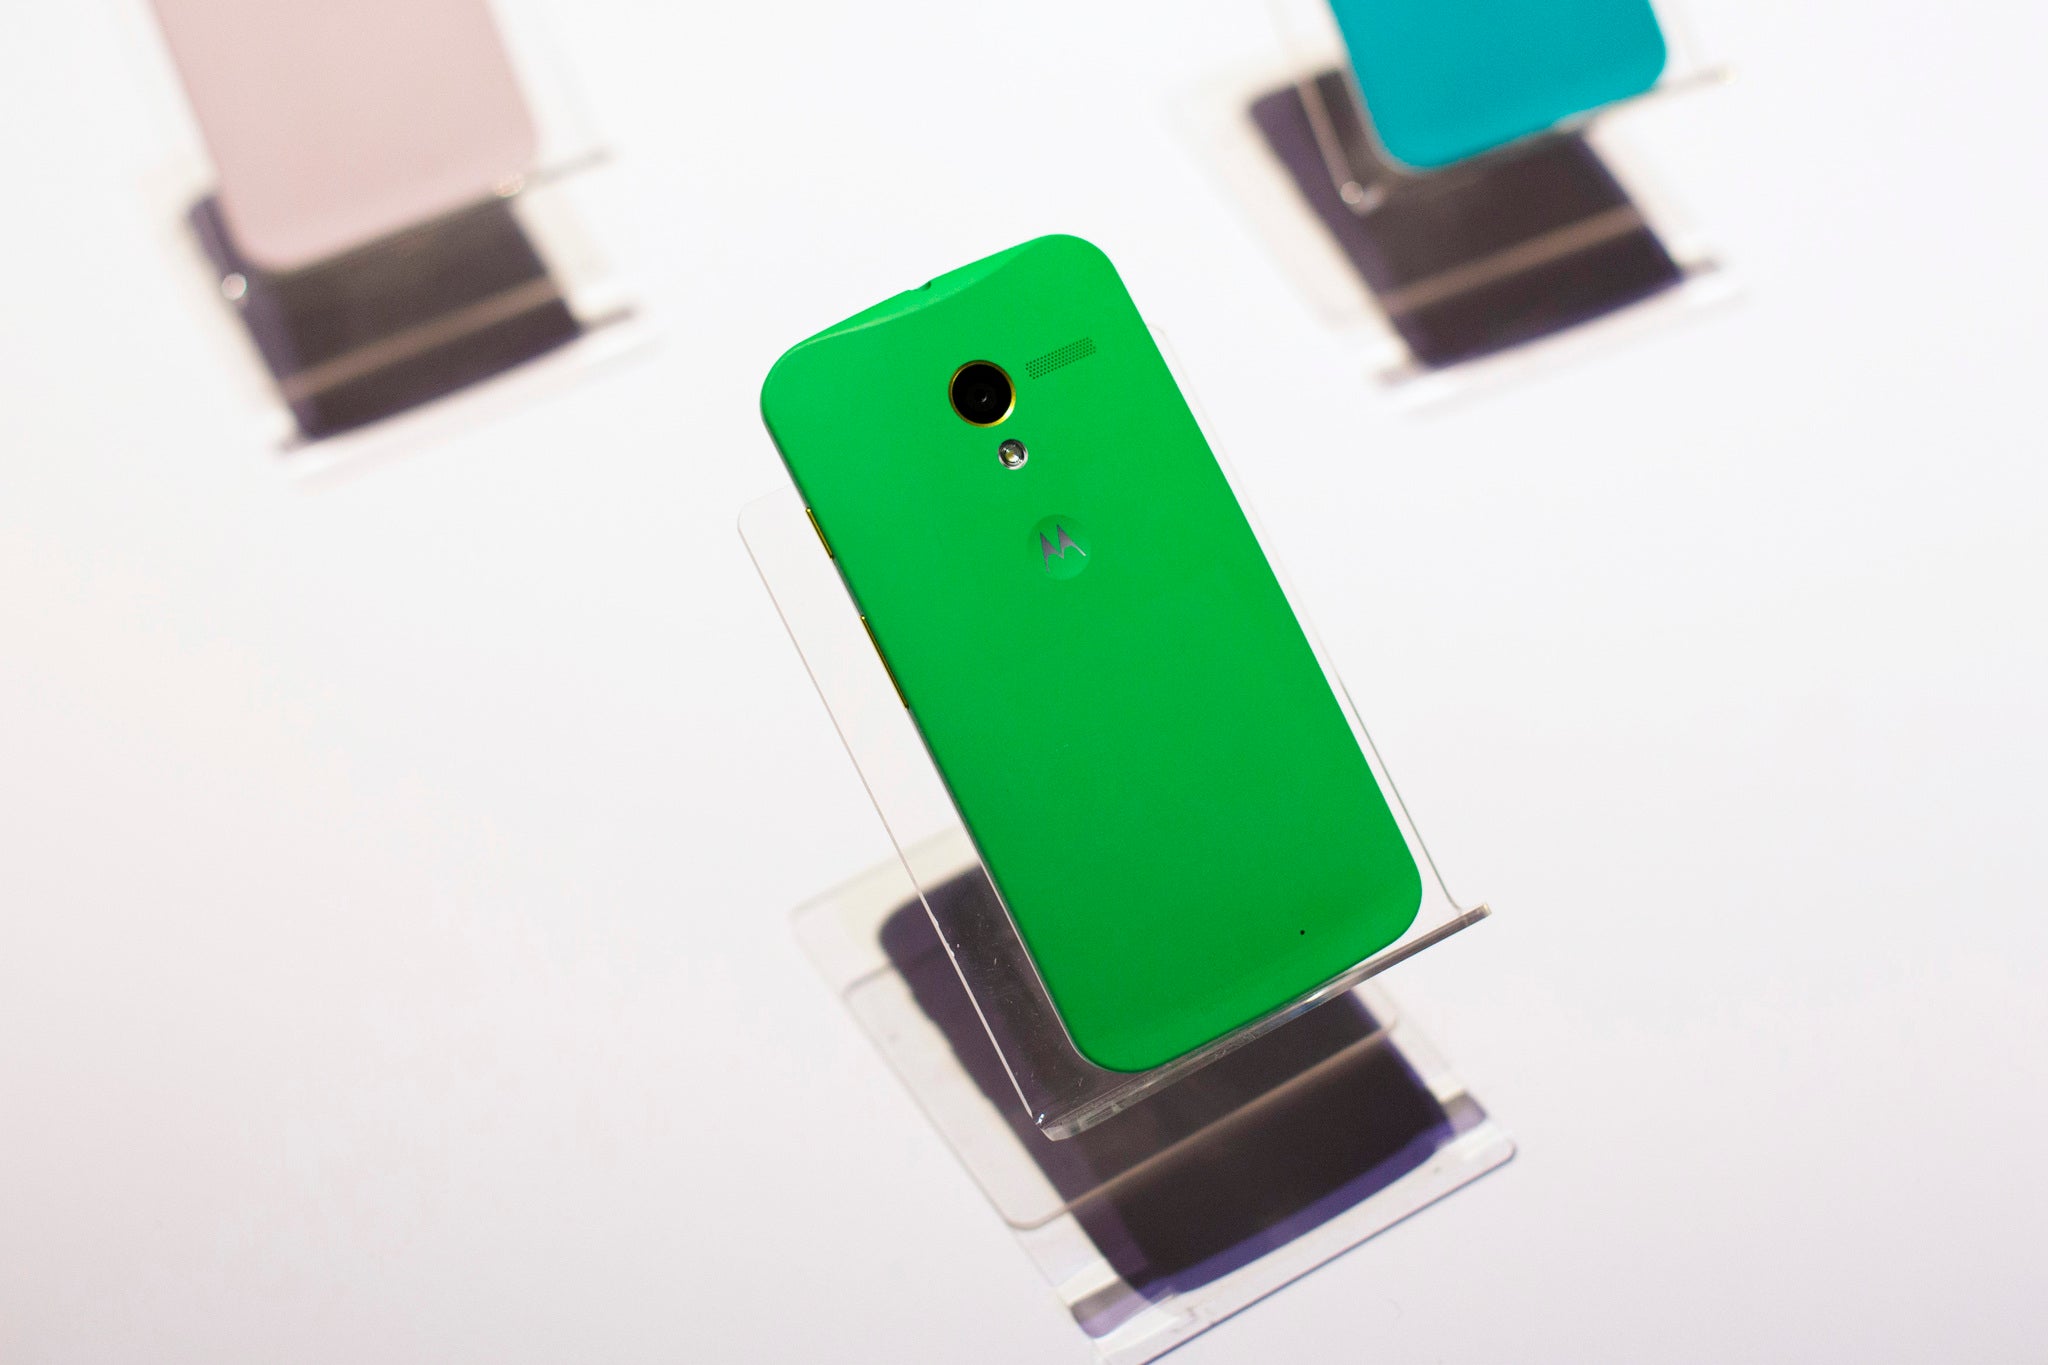 The Moto X handset was hailed as an fantastic phone but failed to move units.